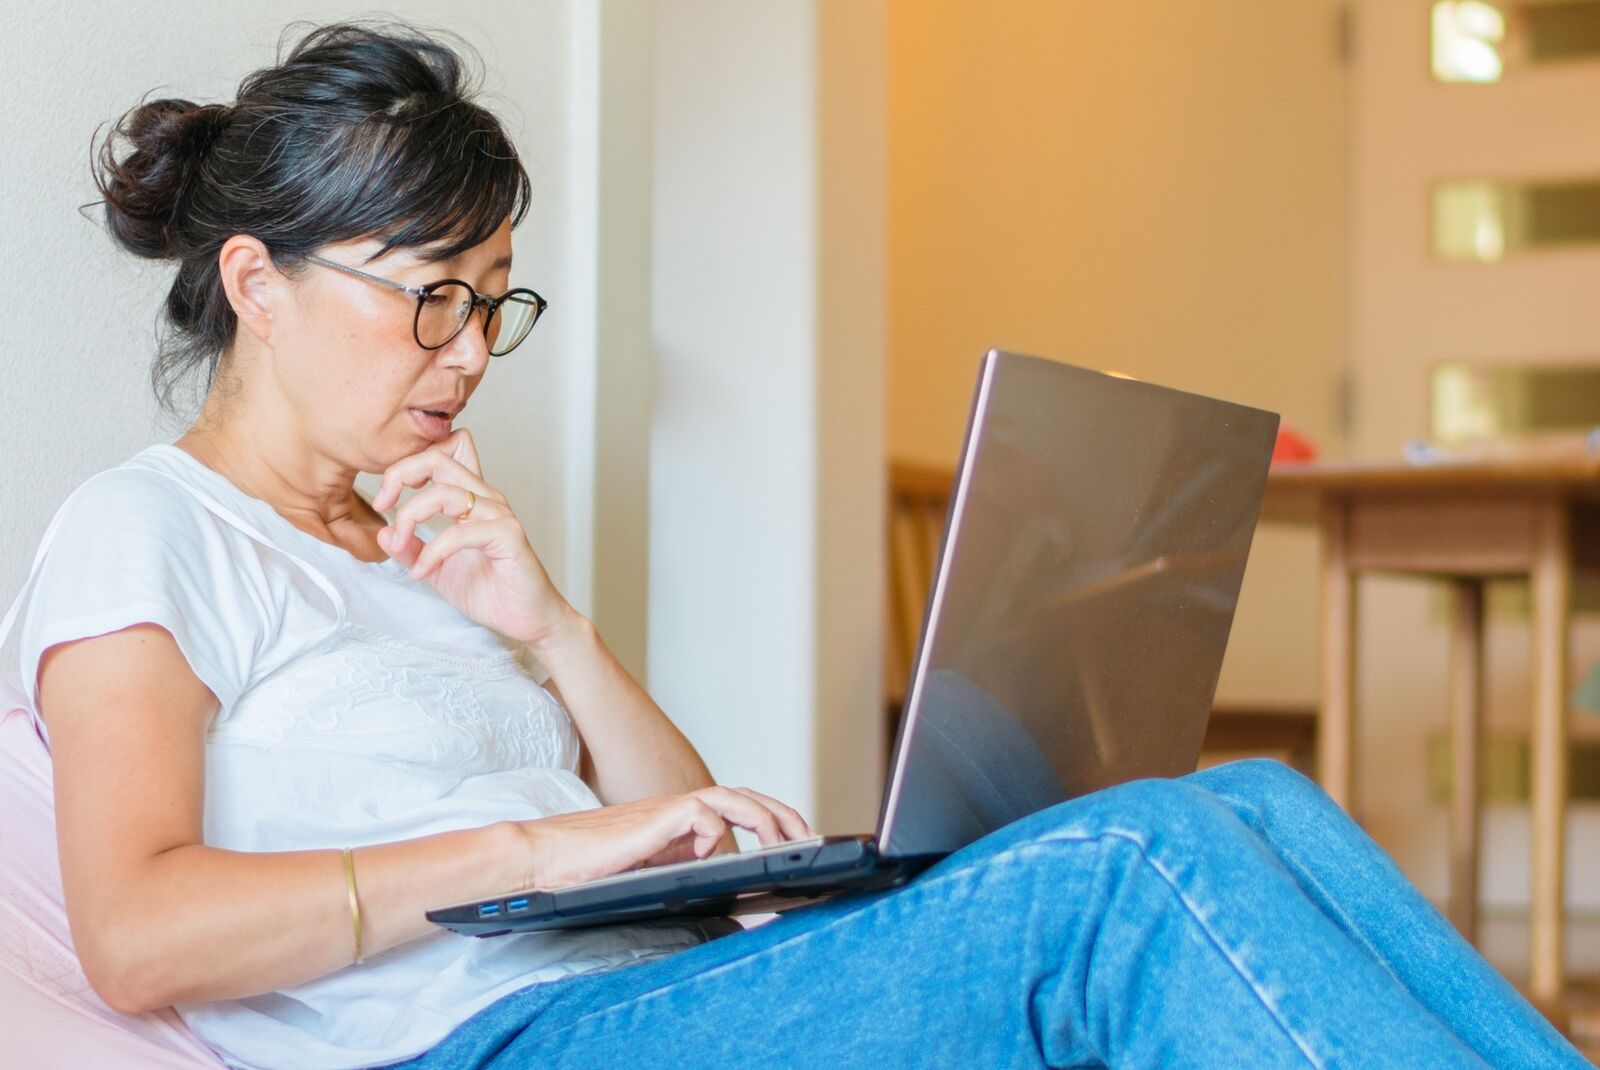 Asian woman in jeans and glasses woman looking at laptop